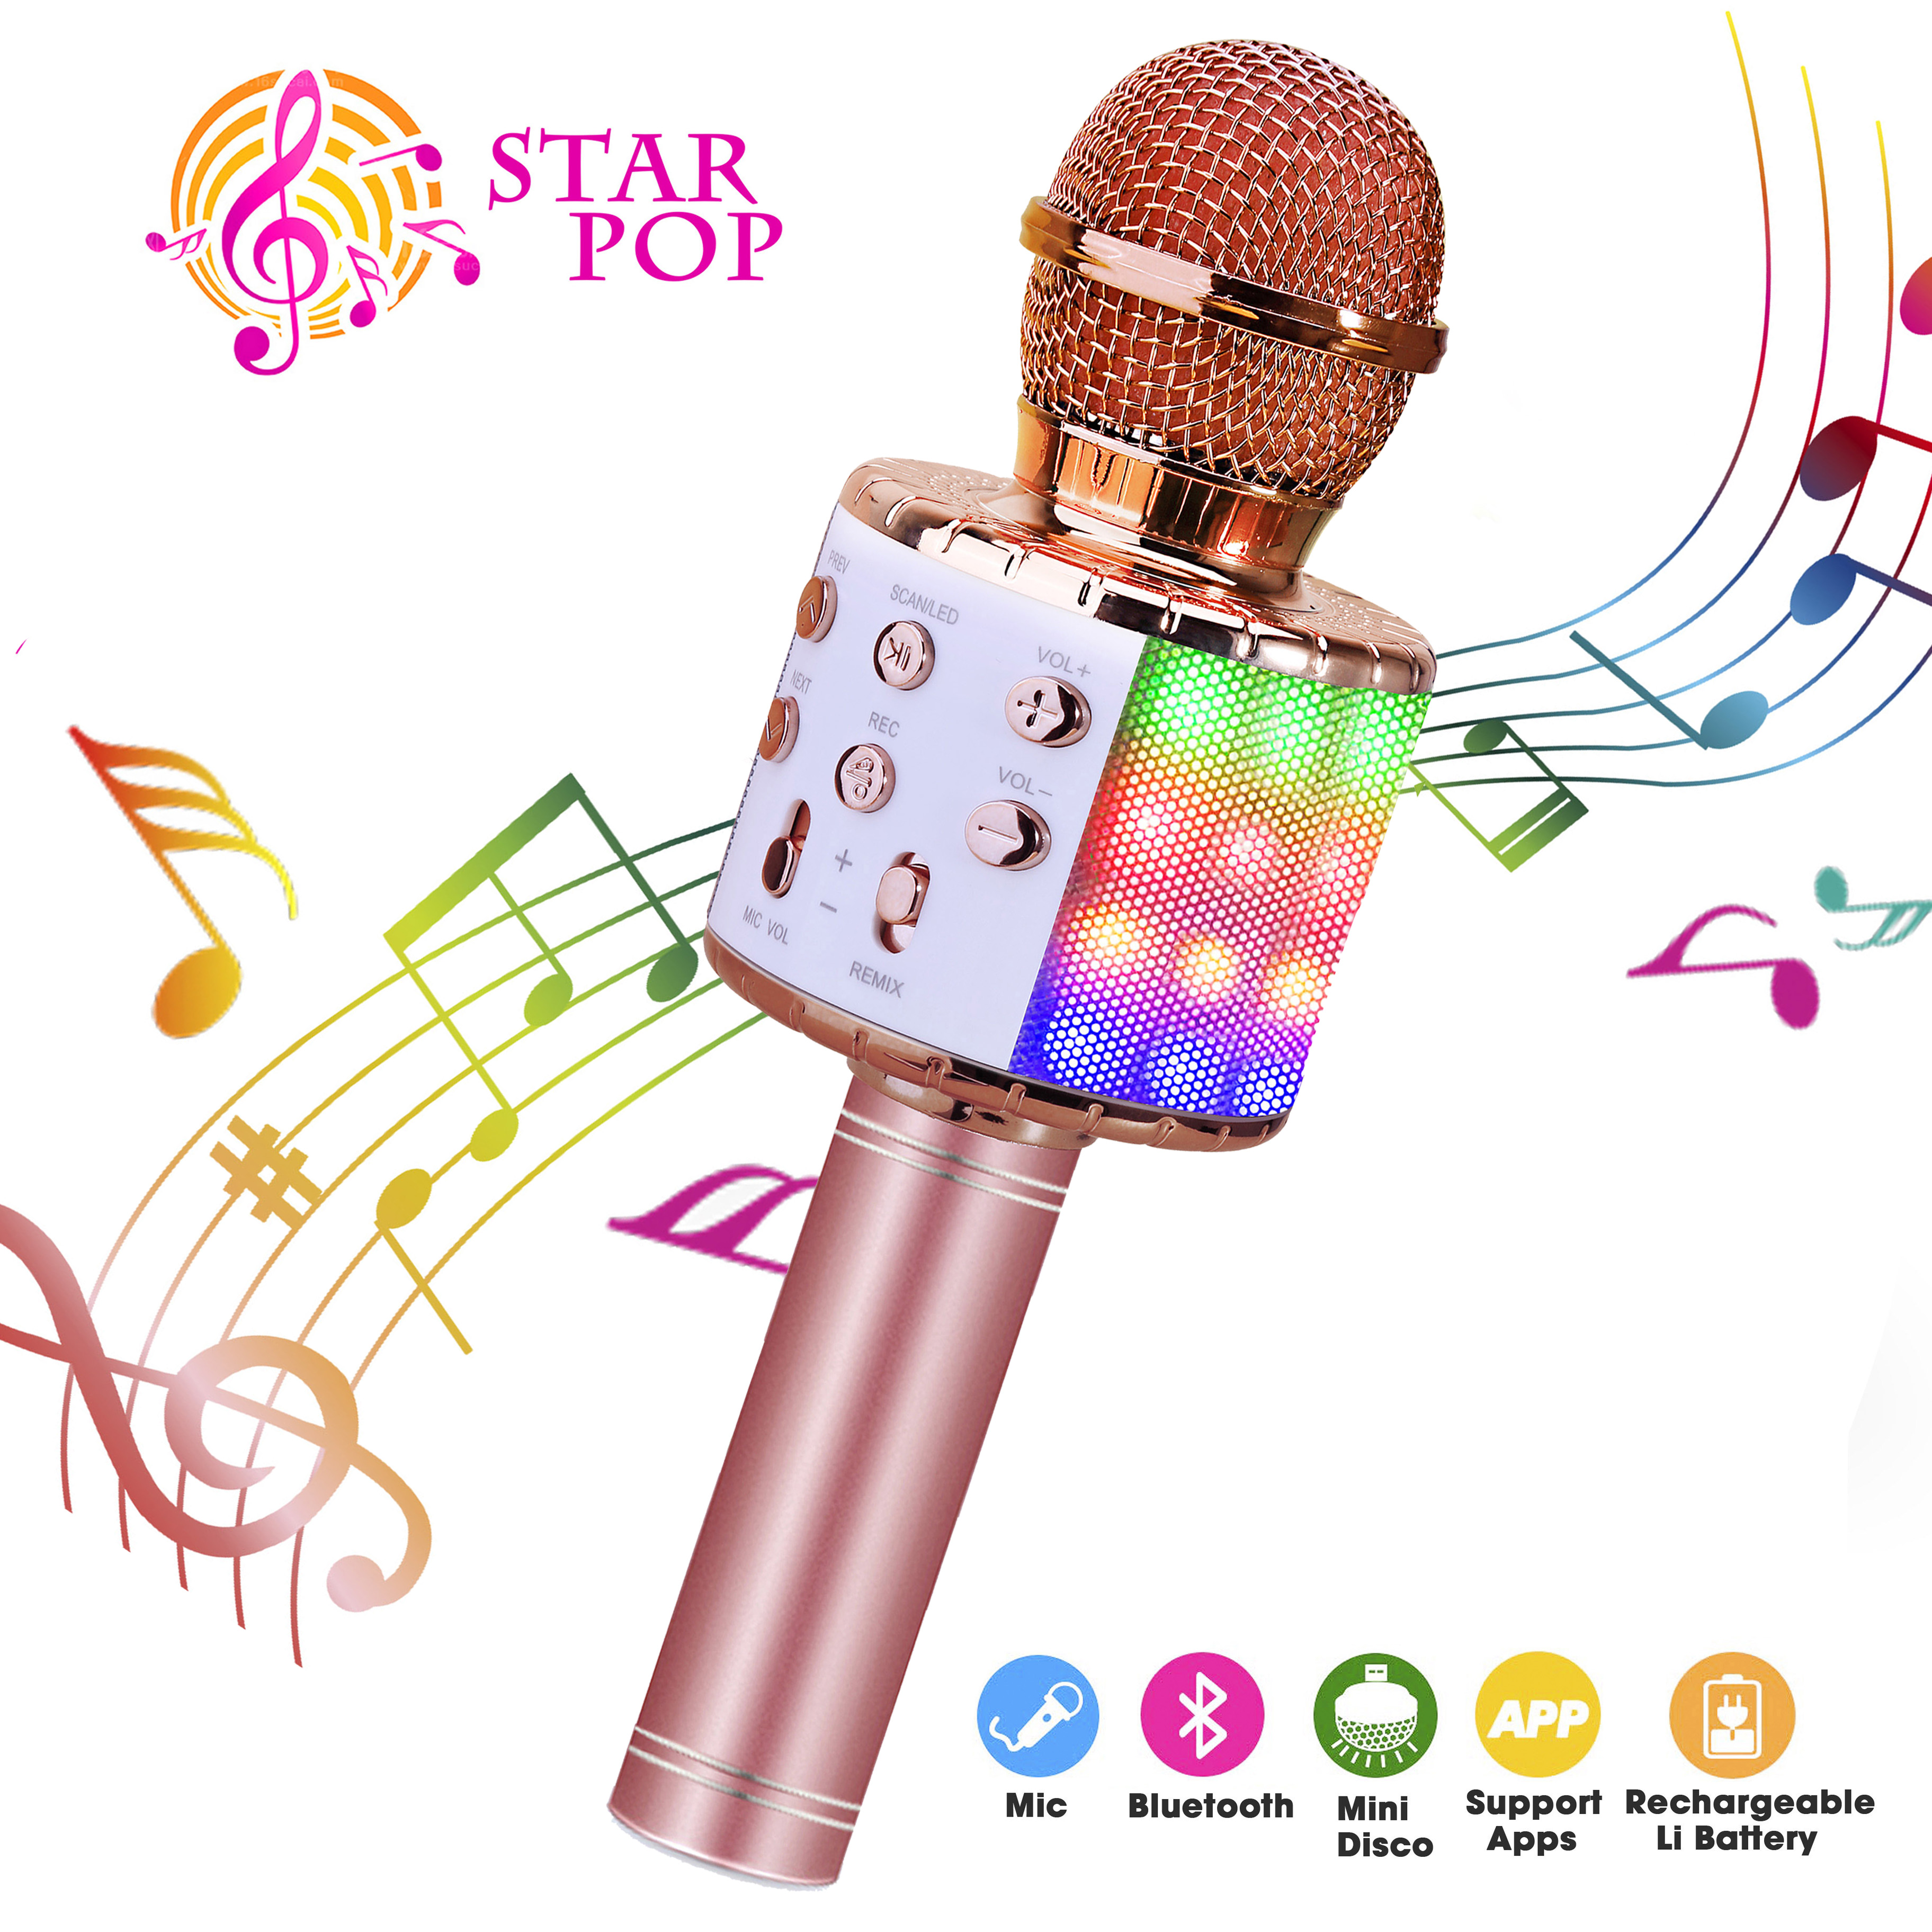 BlueFire 4 in 1 Bluetooth Handheld Wireless Karaoke Microphone Portable Speaker Machine Home KTV Player with Record Function for Android & iOS Devices(Pink)